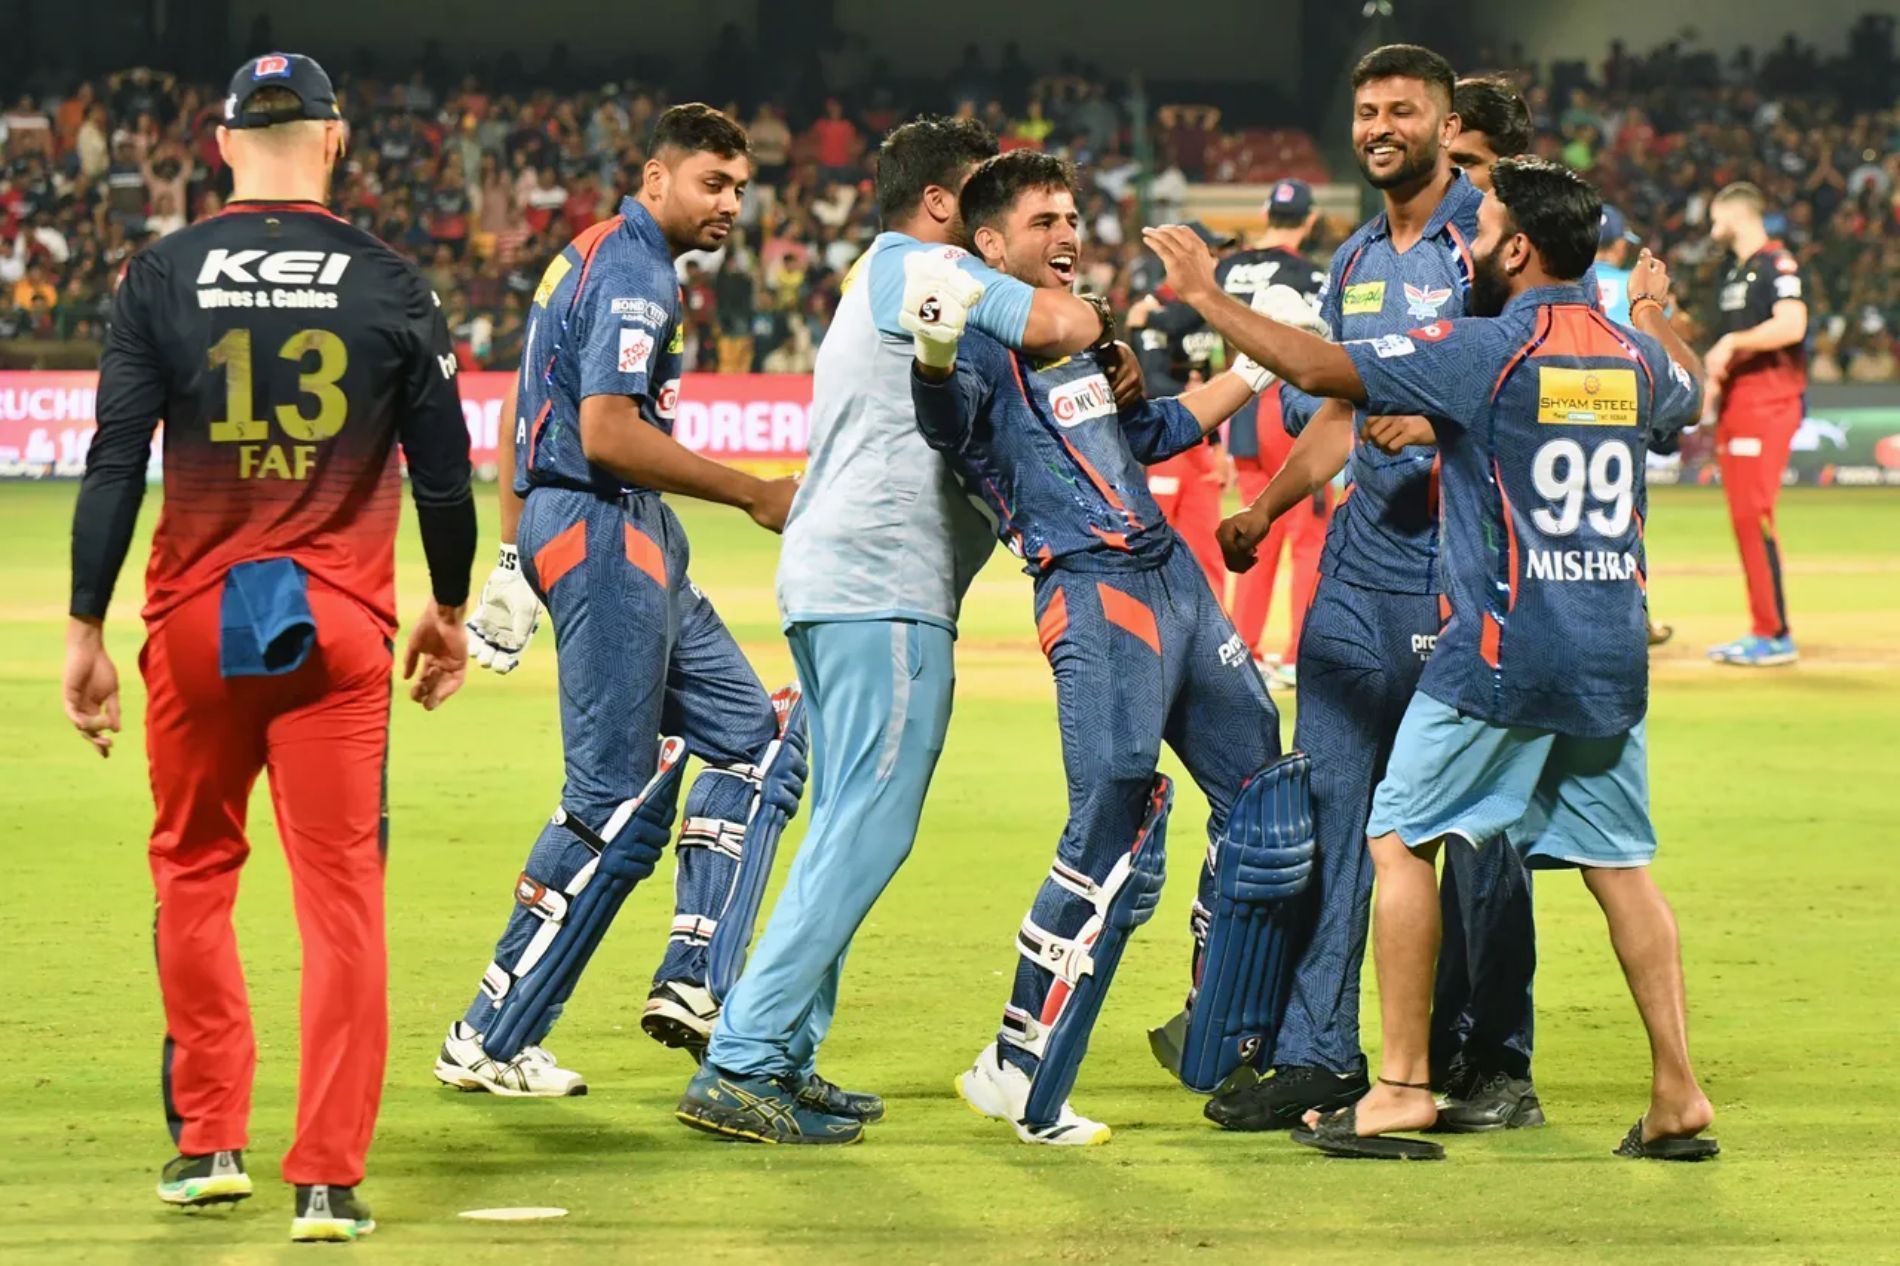 LSG pulled off a miracle against the RCB at the Chinnaswamy Stadium